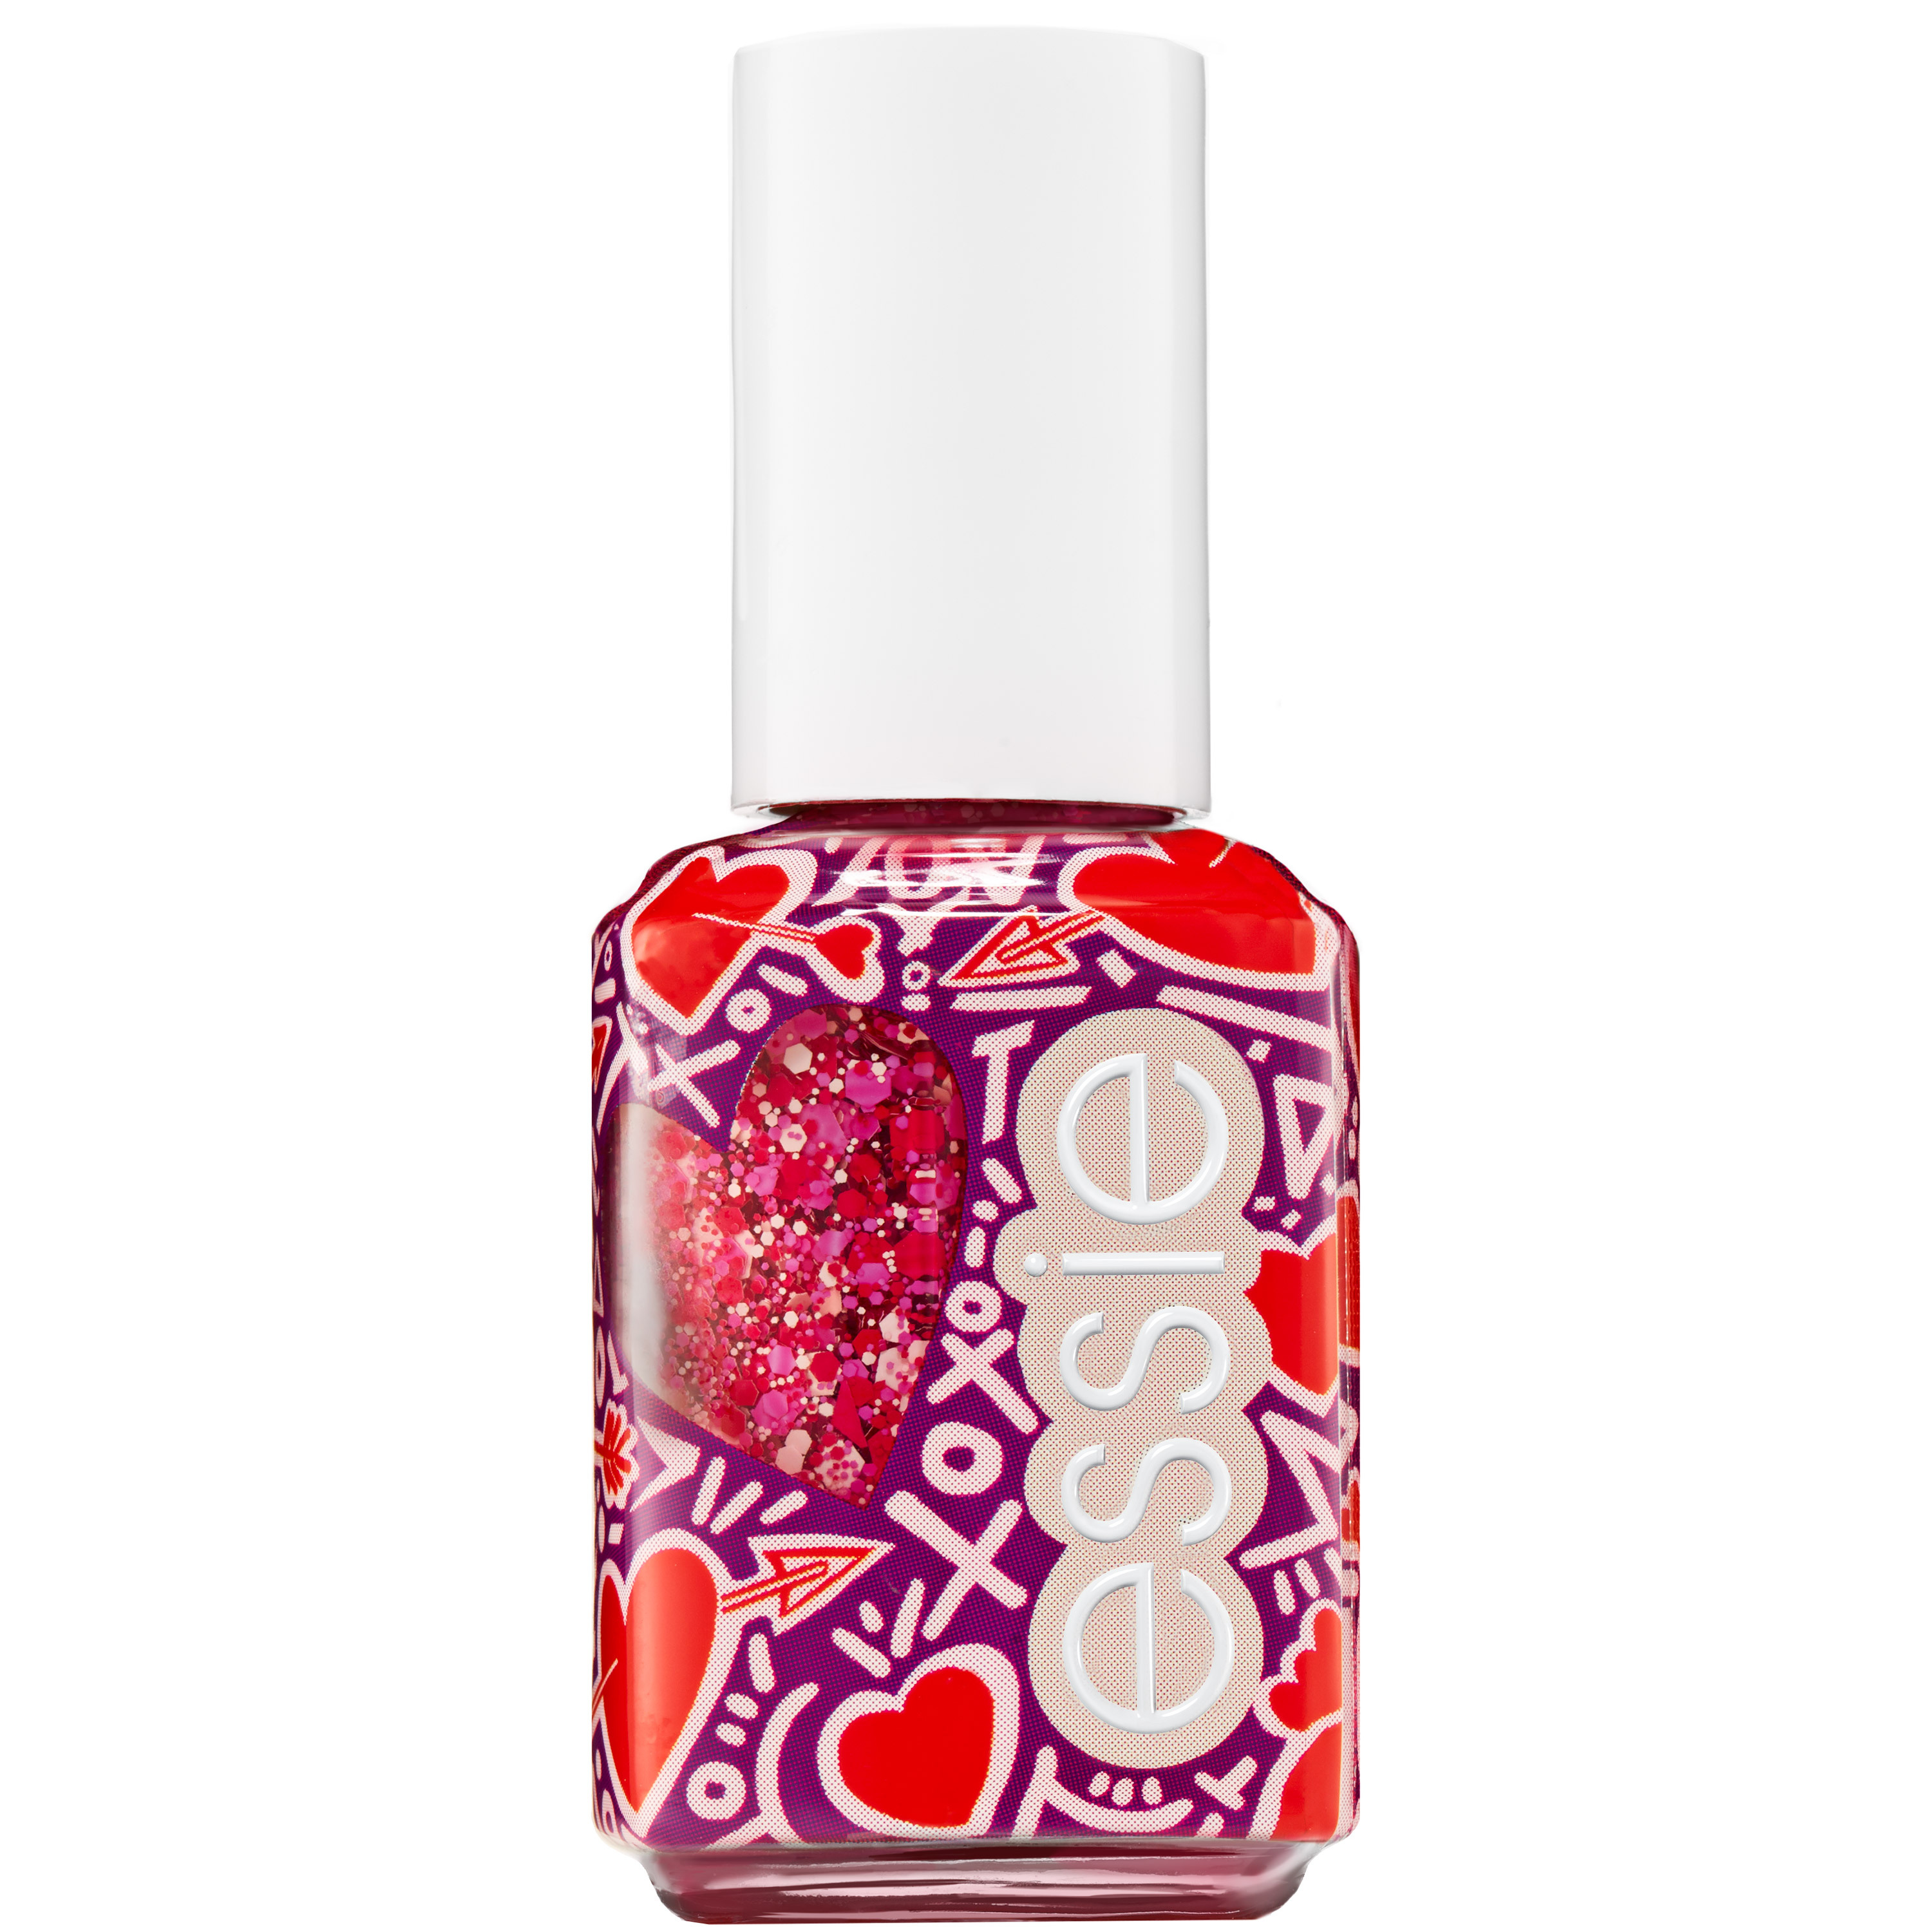 Essie valentijn 2019 limited edition - 600 you're so cupid - roze - glitter topcoat - 13,5 ml